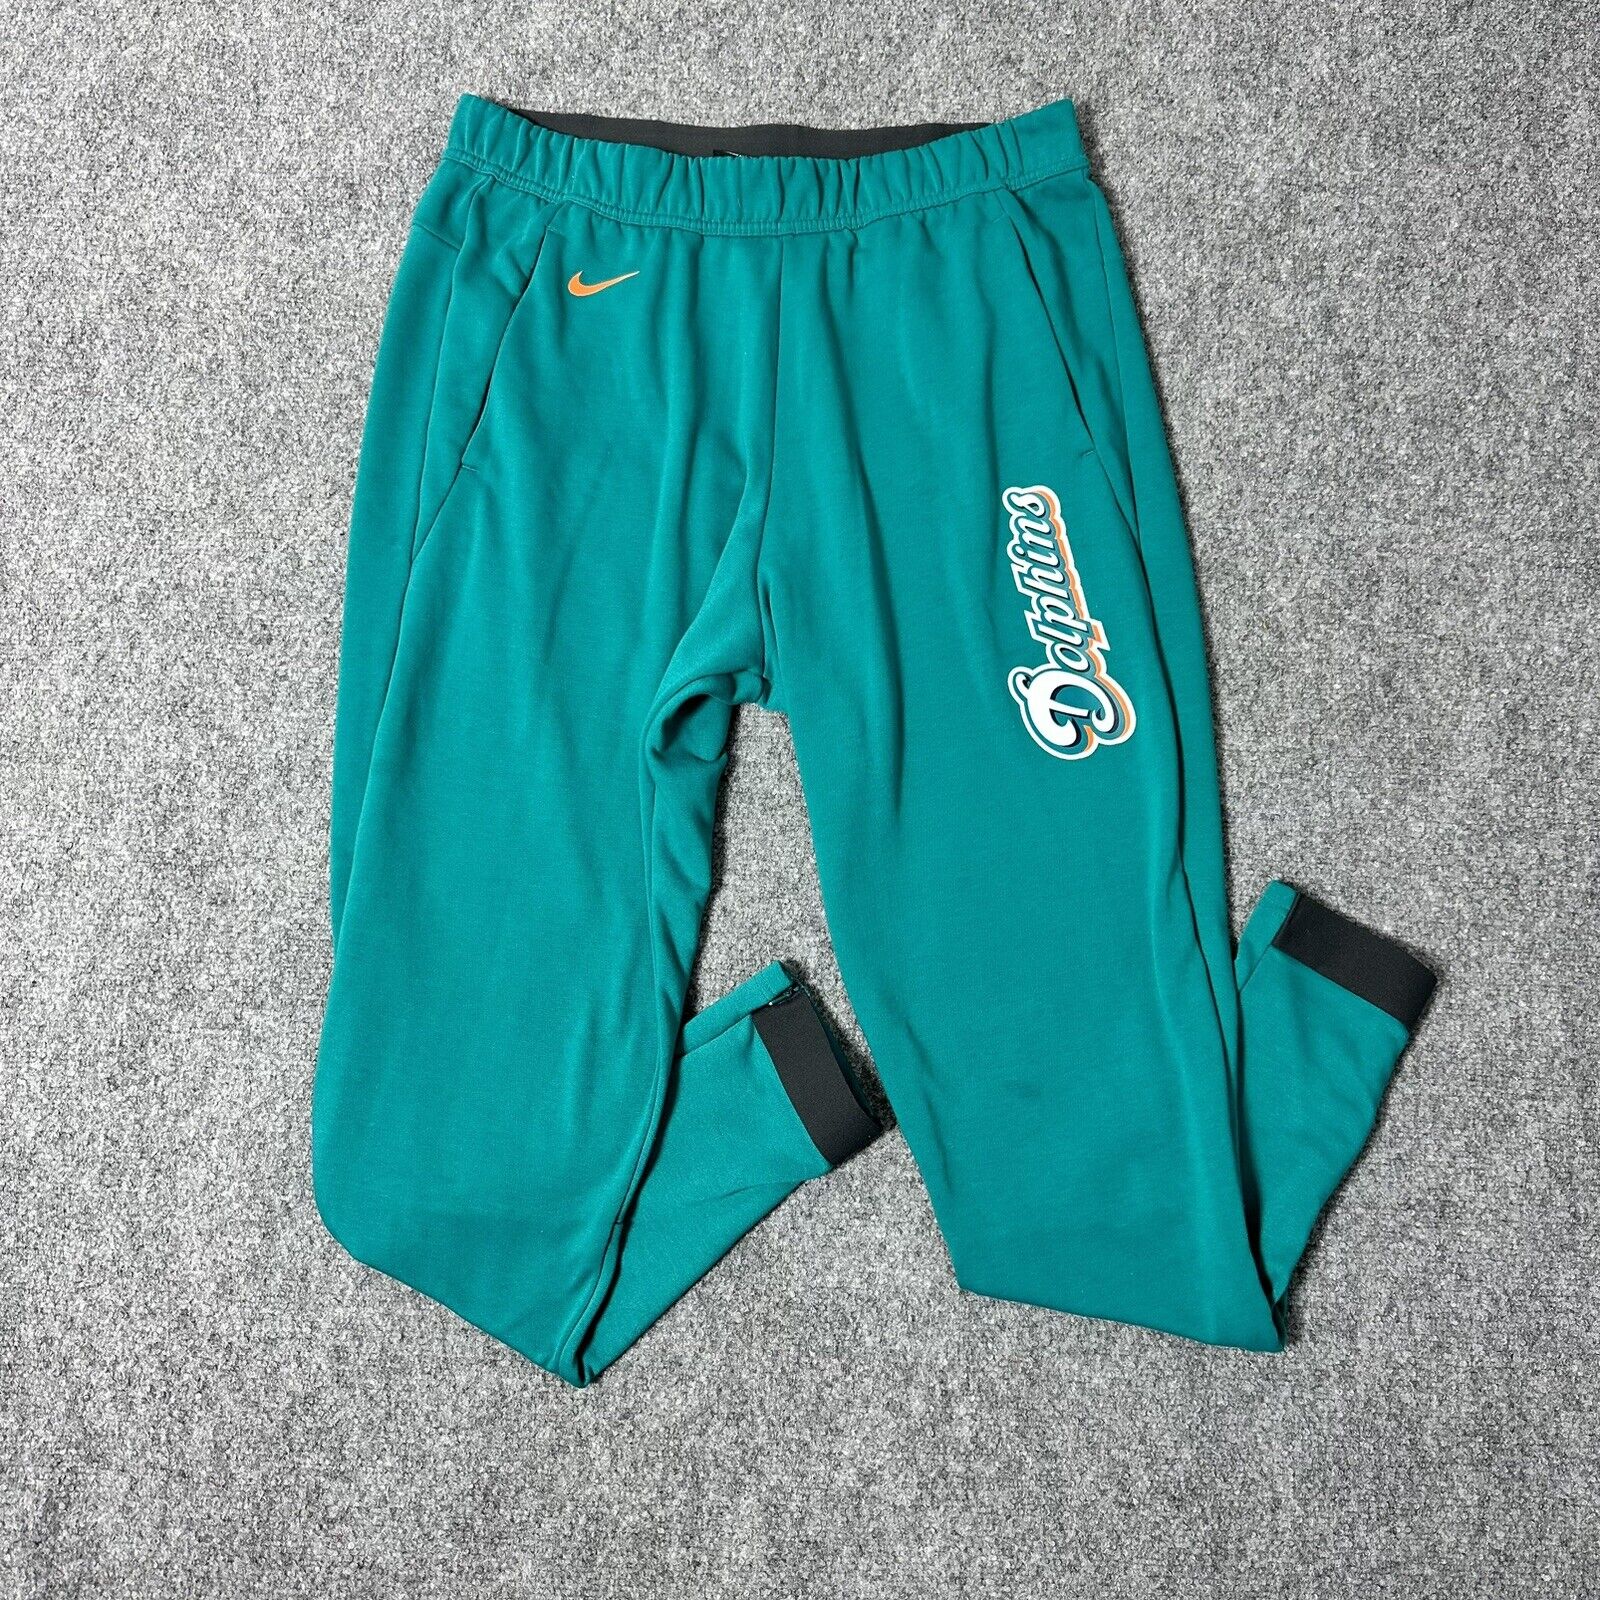 Nike Miami Dolphins Dri Fit NFL Training Sweatpants Size Large Stain Used